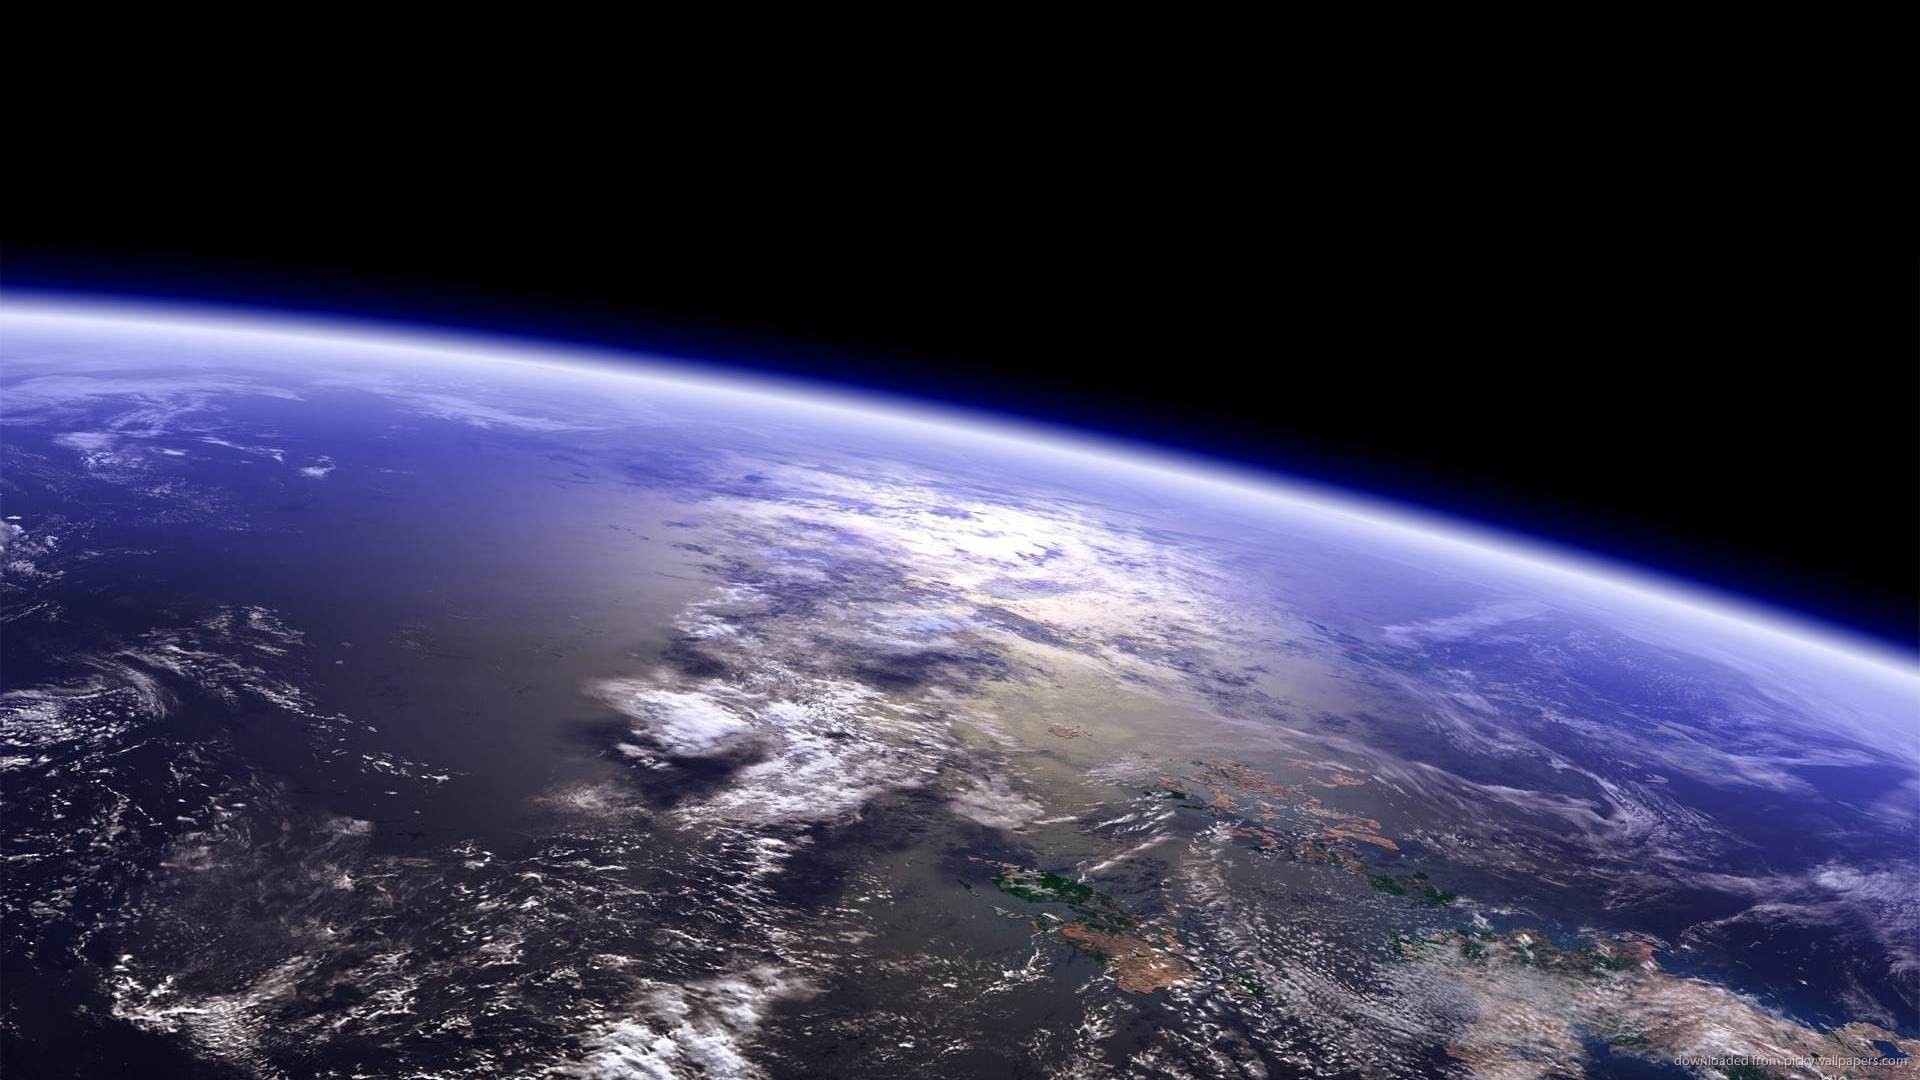 Earth From Space Wallpaper 1920x1080 (74+ images)